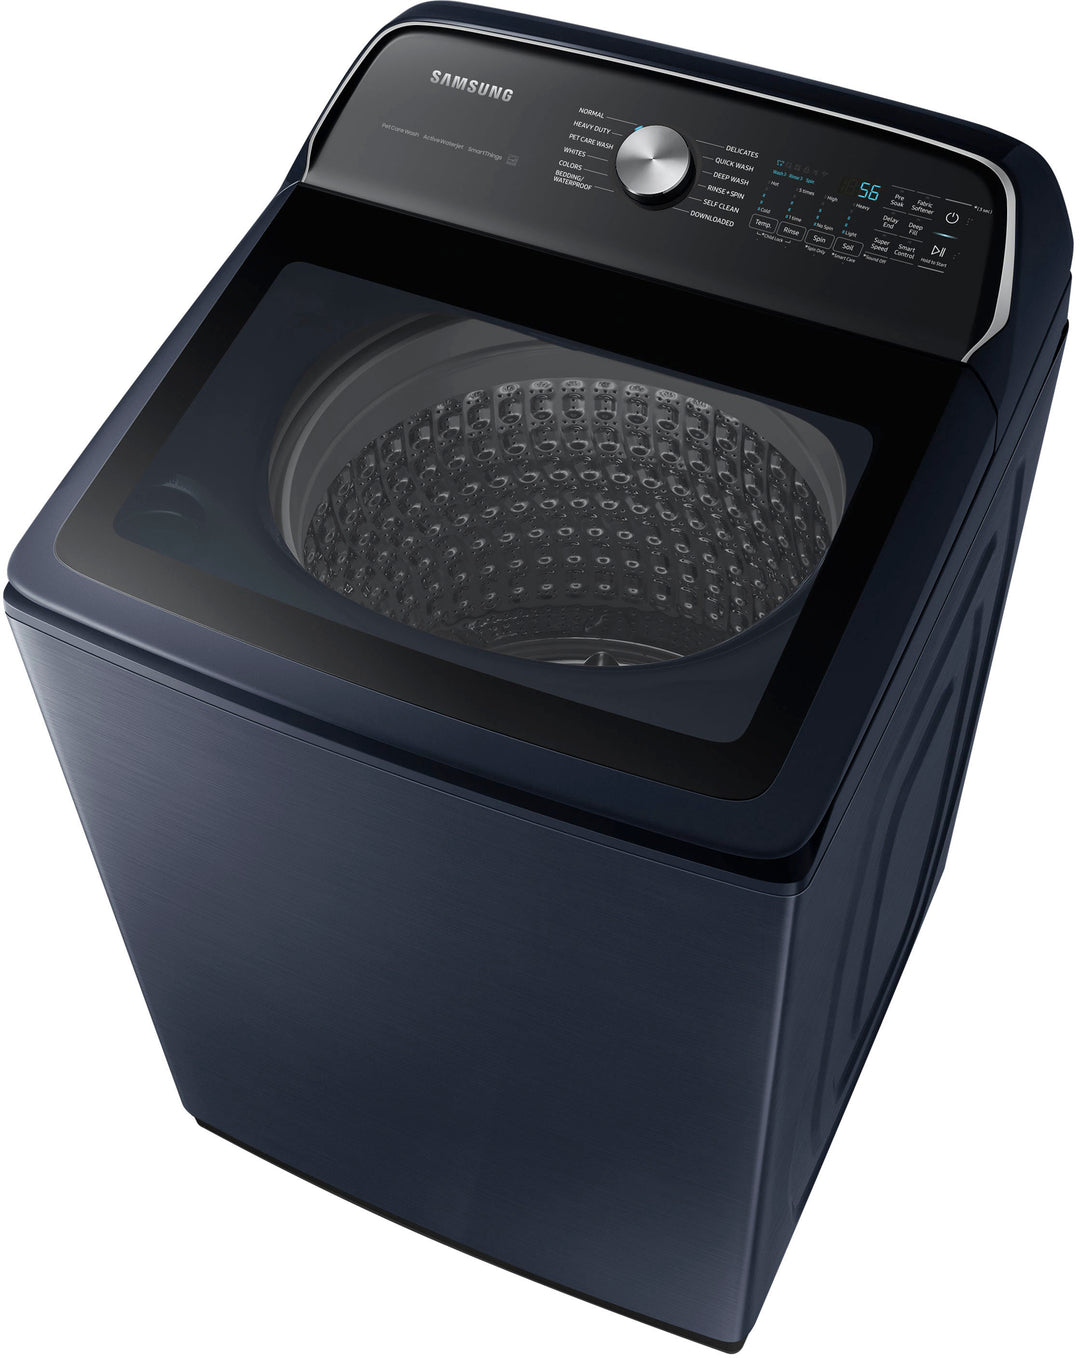 Samsung - 5.4 cu. ft. Smart Top Load Washer with Pet Care Solution and Super Speed Wash - Brushed Navy_6